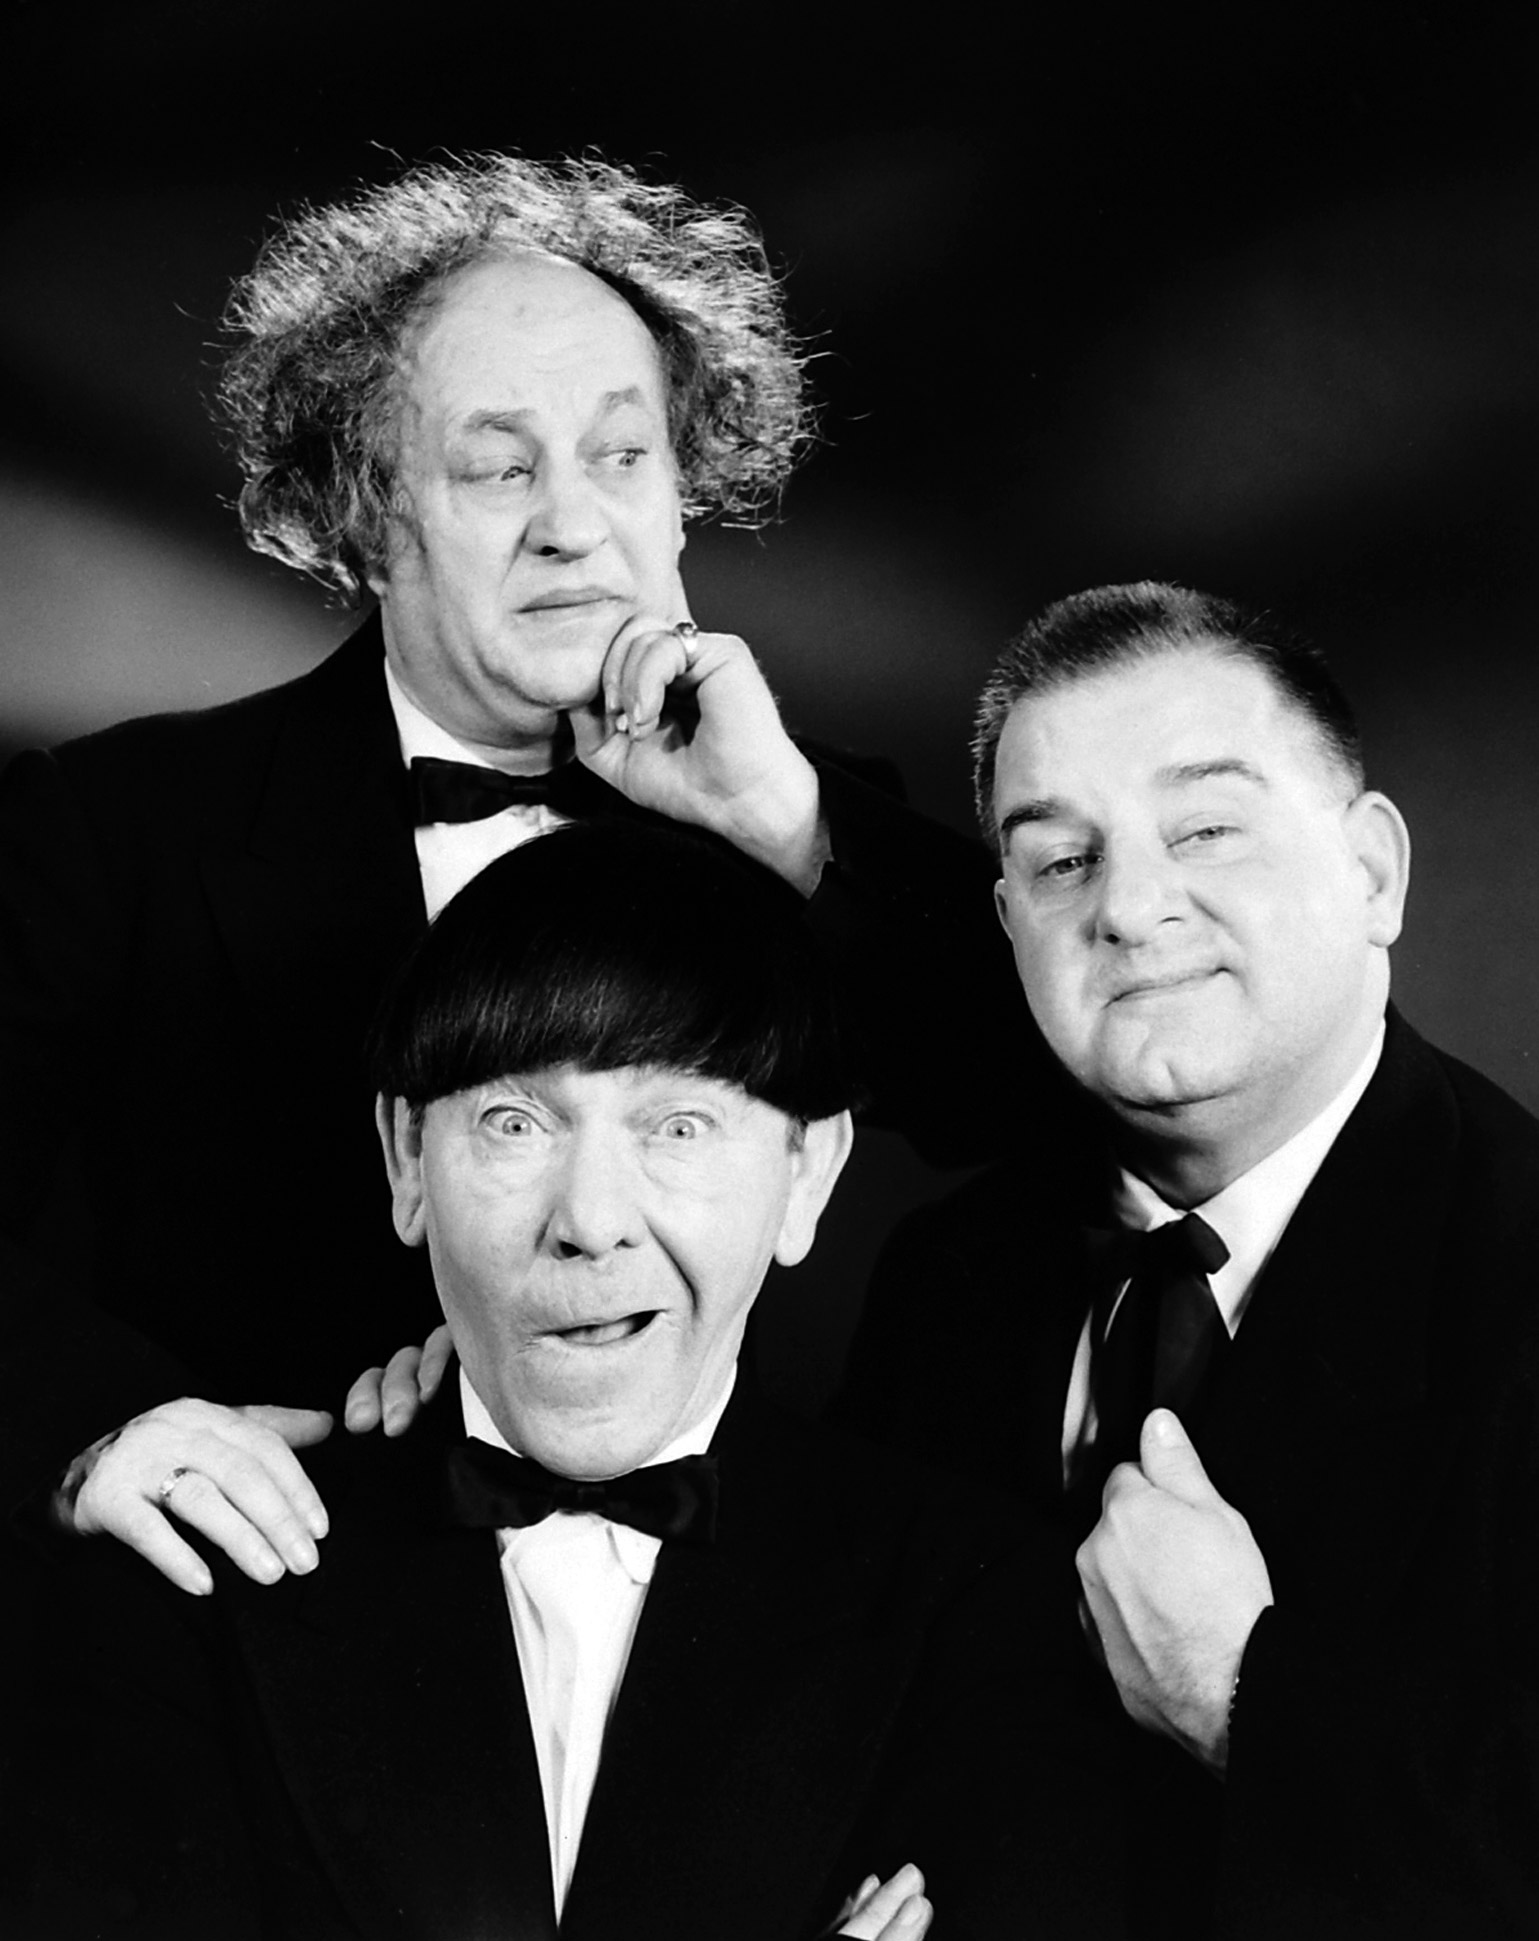 Comedy group The Three Stooges (clockwise from L): Curly Joe DeRita, Moe Howard, Larry Fine.